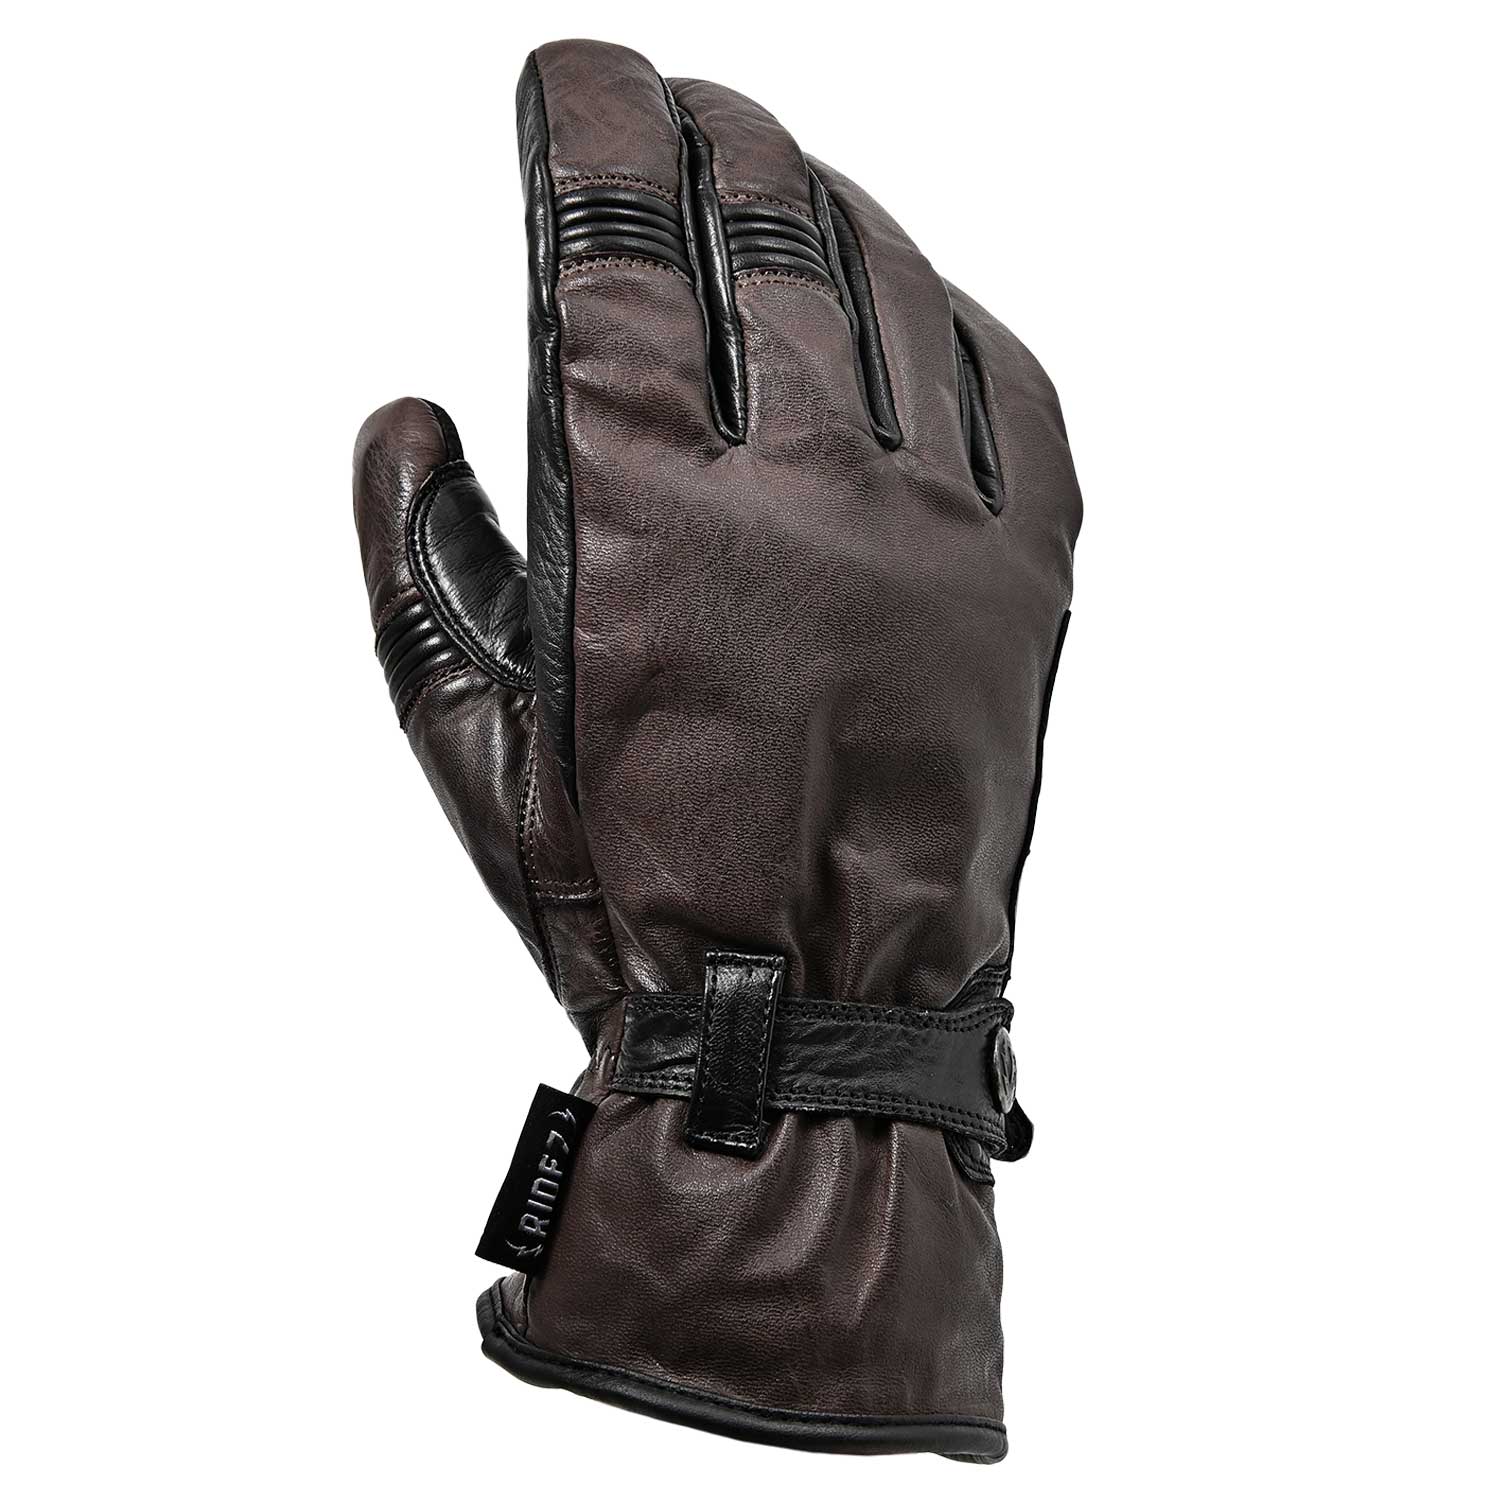 RIDEZ MELD GLOVES Cold Protection Motorcycle Leather Gloves DARK BROWN RWG06